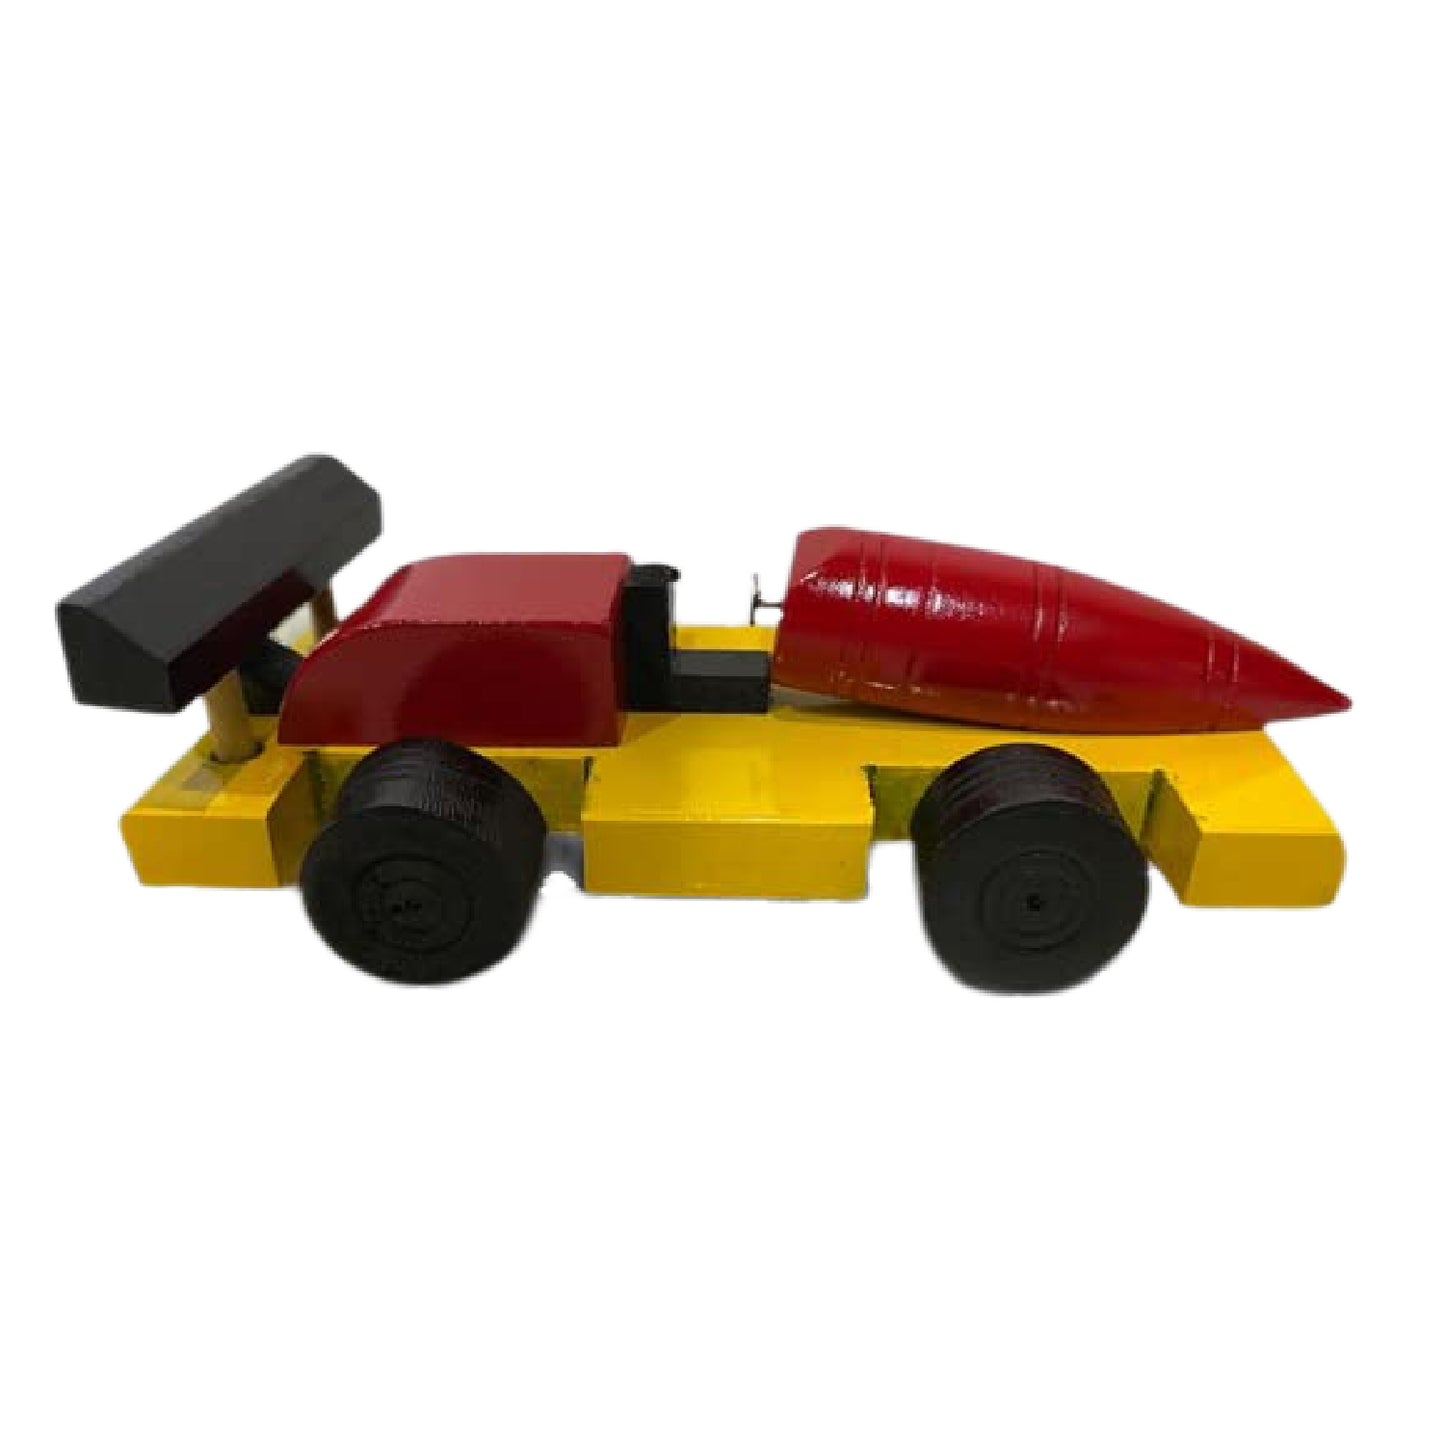 Car Toys For Kids, Car Game, Wooden Toys, Wooden Race Car Pull Along Toy For Kids